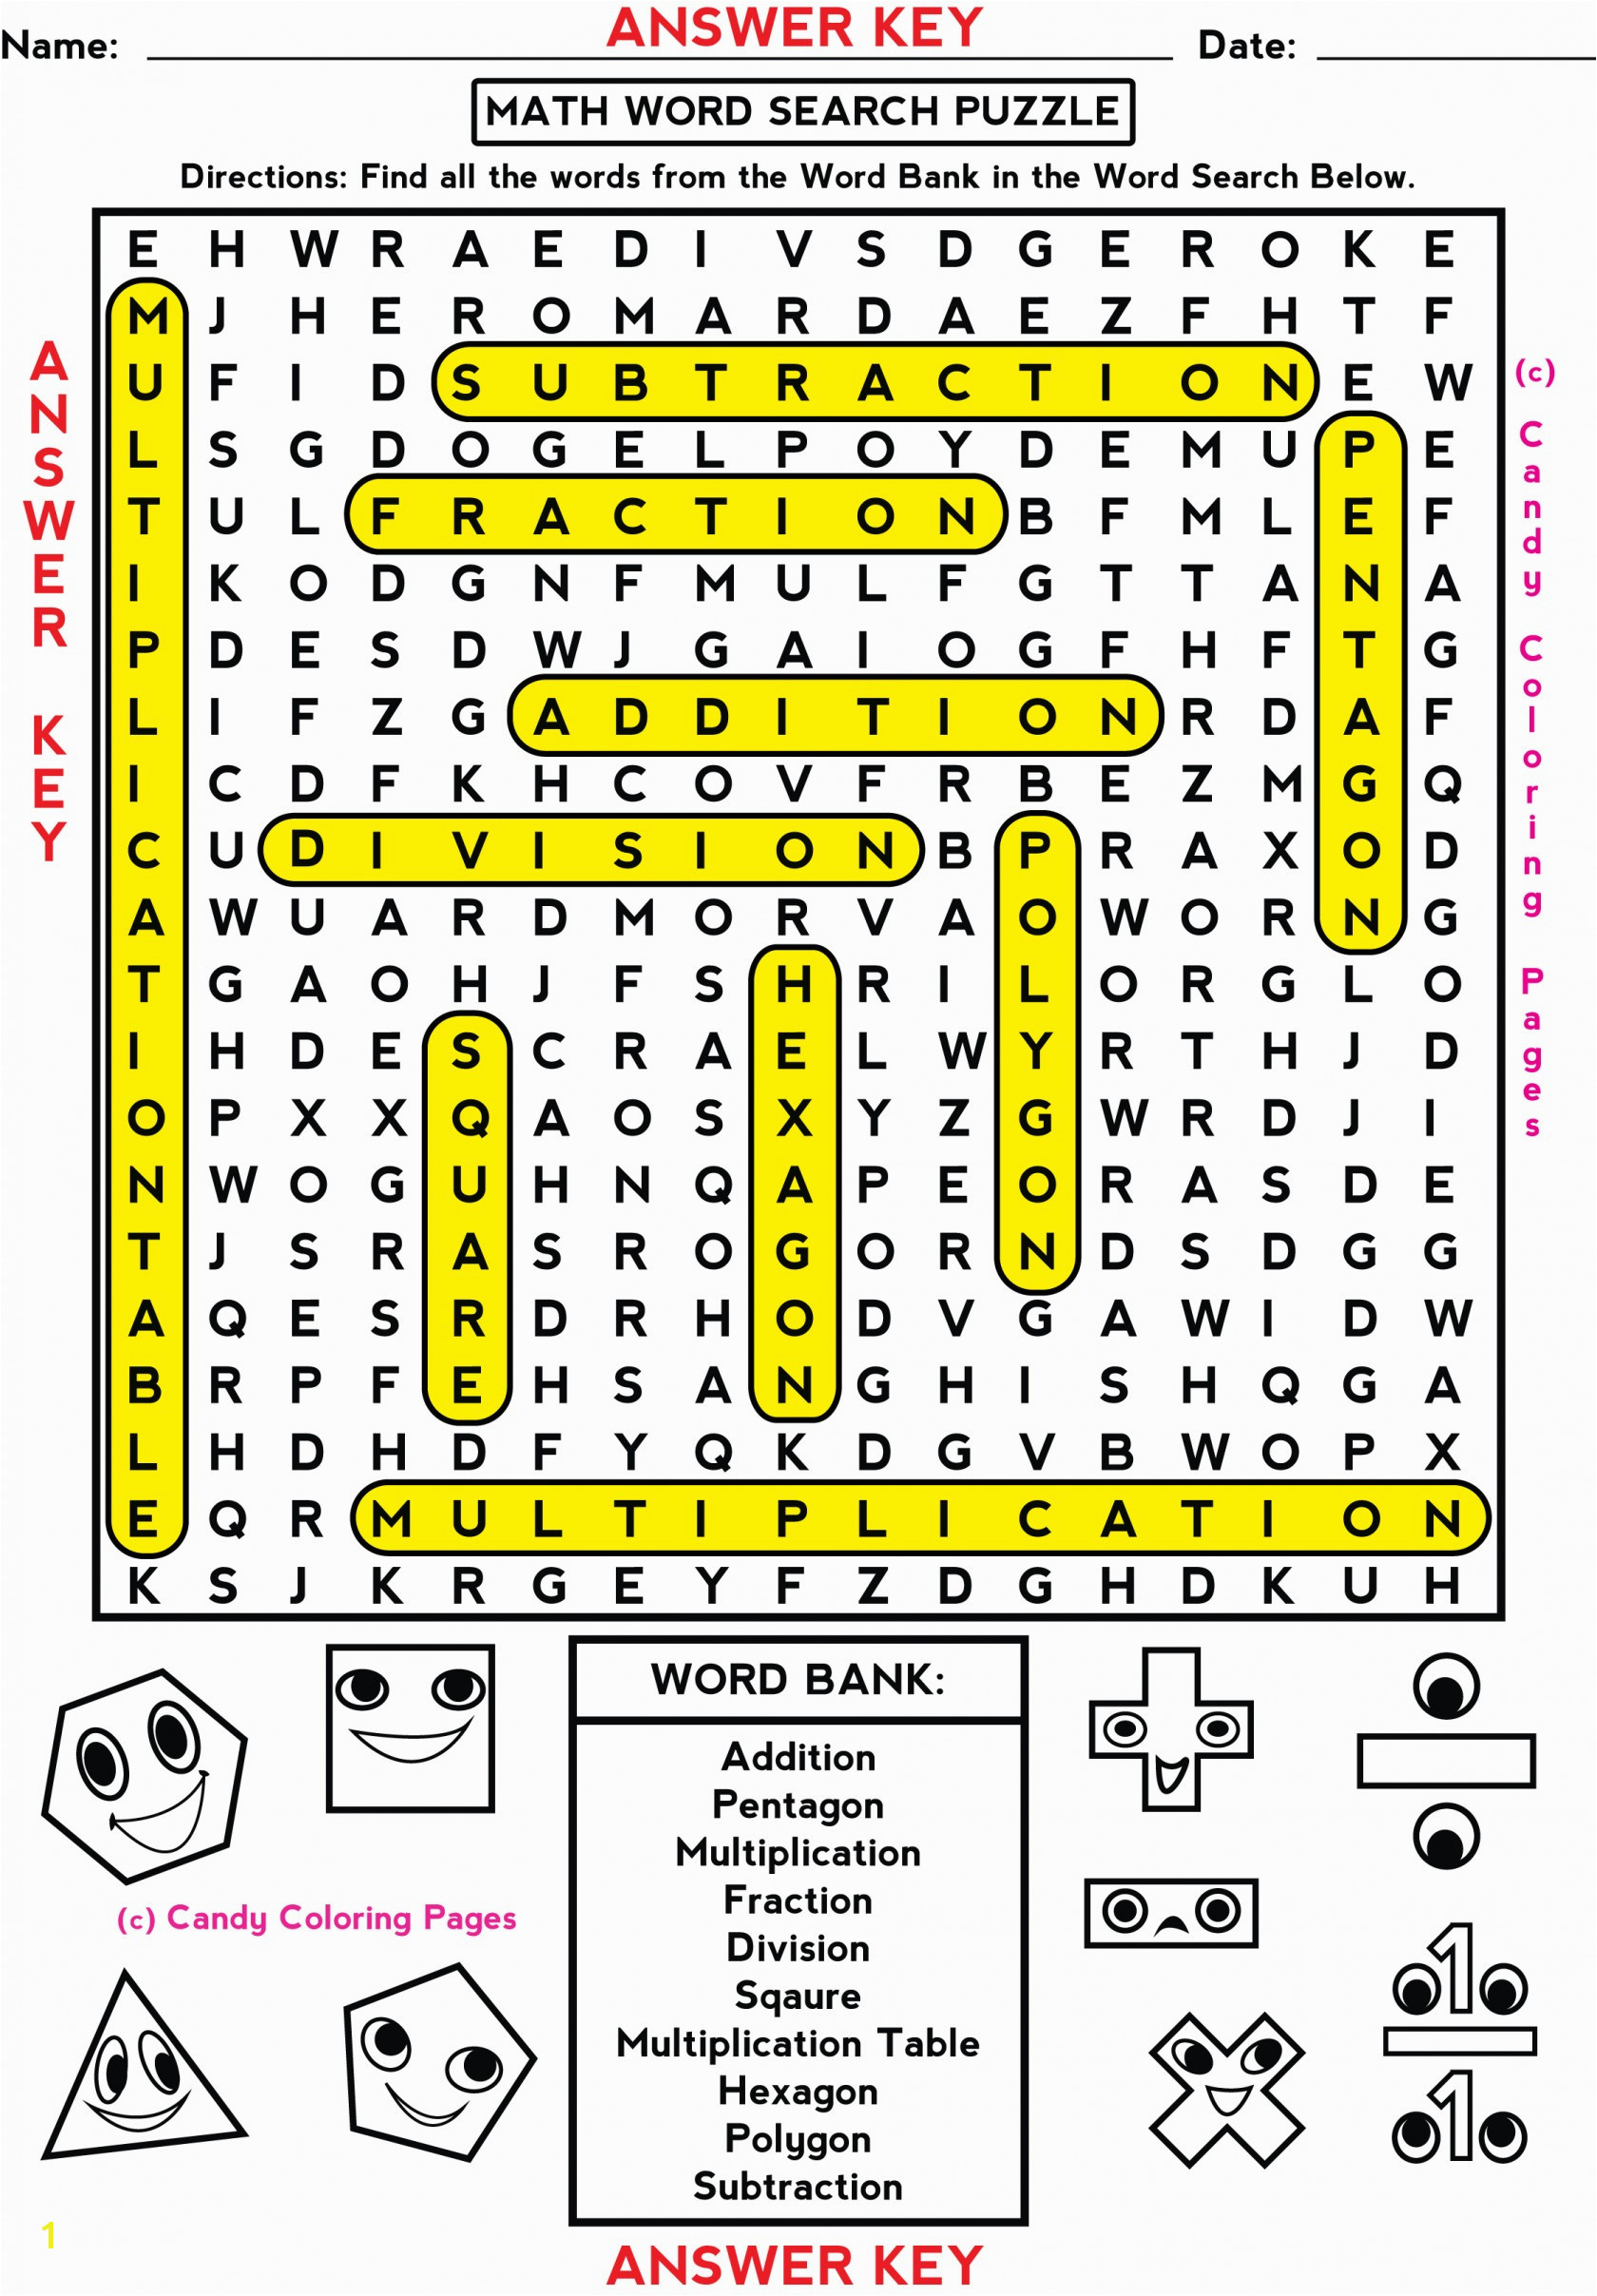 Cool Math Games Coloring Pages Math Puzzle Games with Answers Halloween Math Games Fun